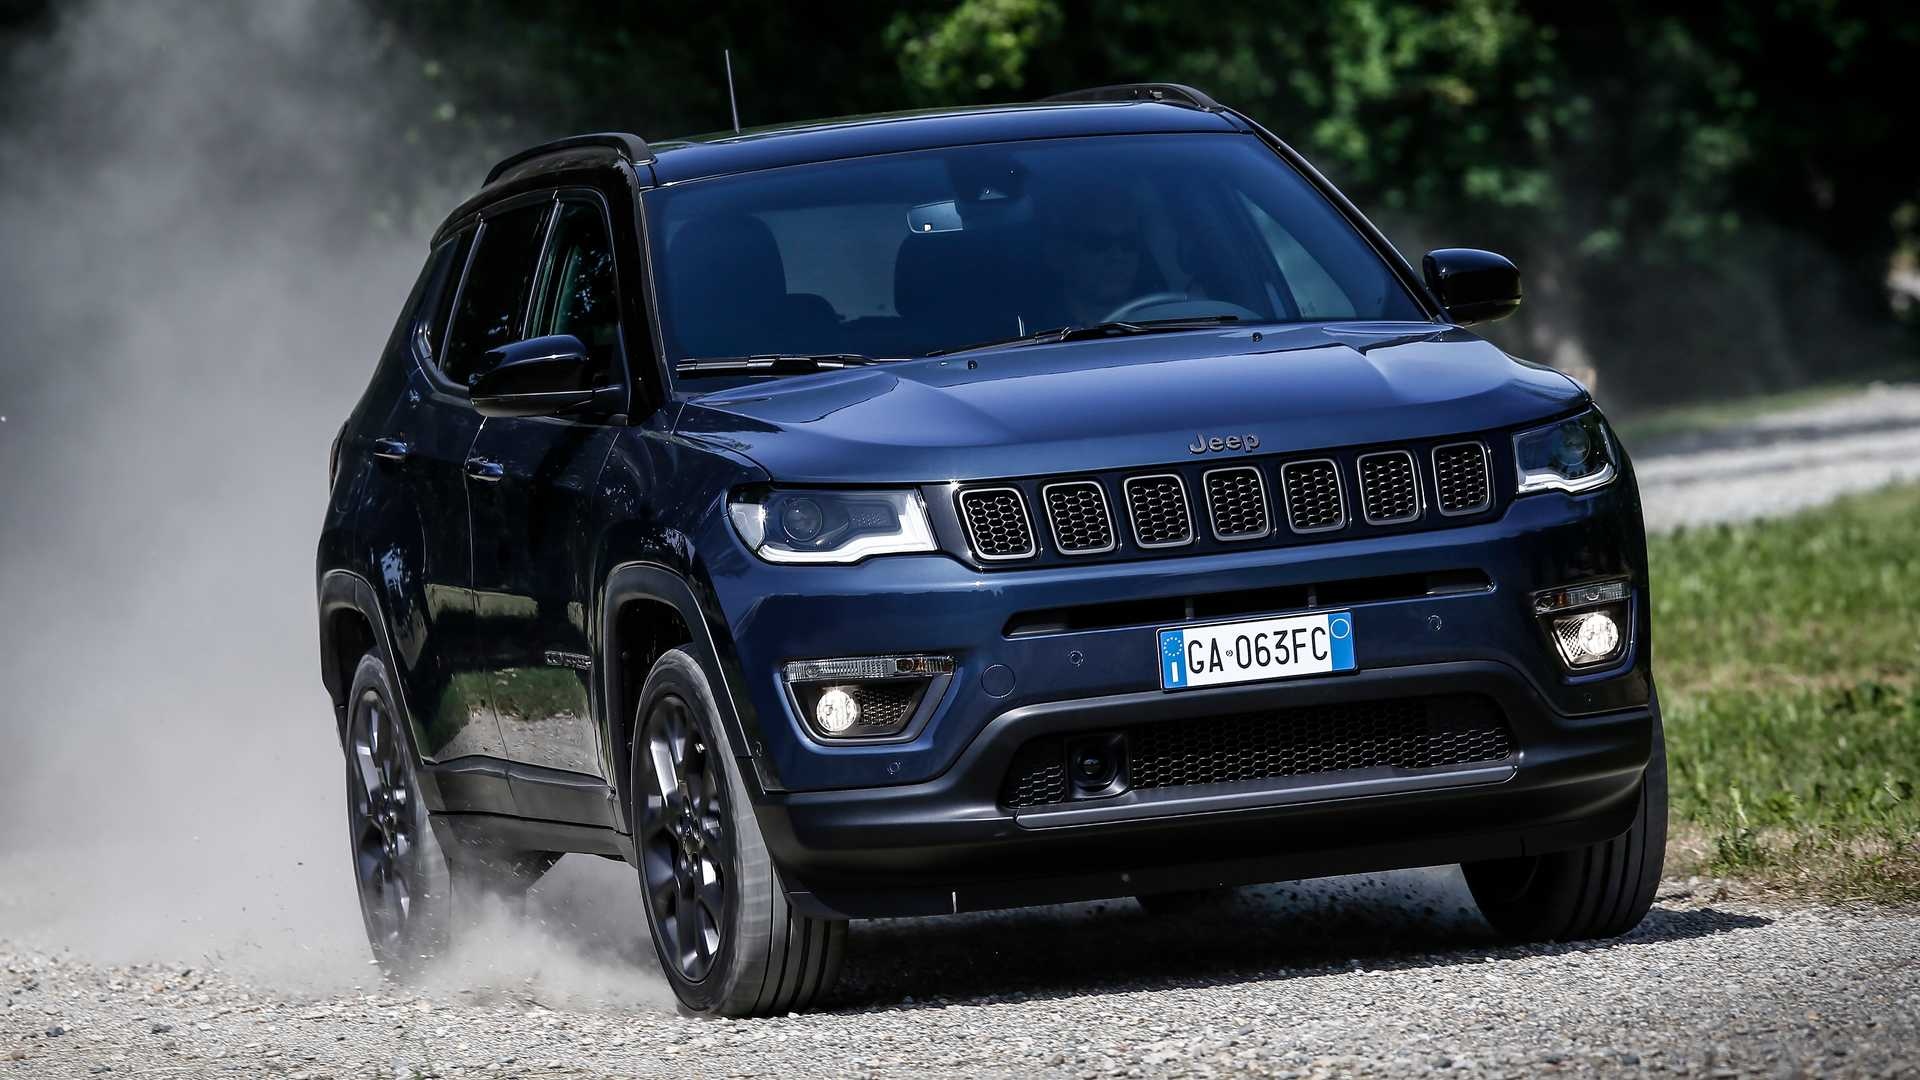 Jeep Compass, 2020 model, Affordable luxury, Cutting-edge technology, 1920x1080 Full HD Desktop